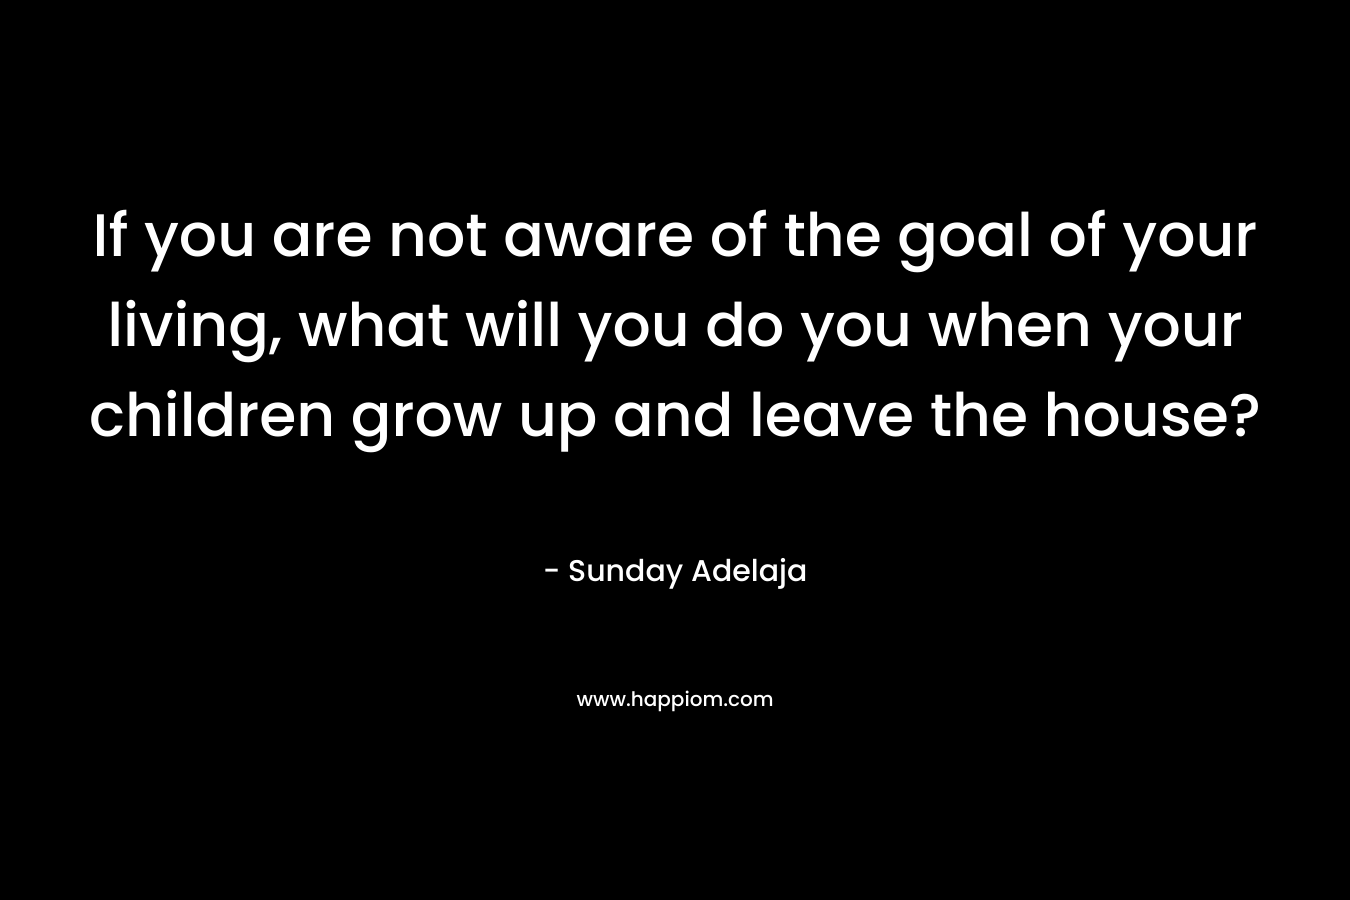 If you are not aware of the goal of your living, what will you do you when your children grow up and leave the house?